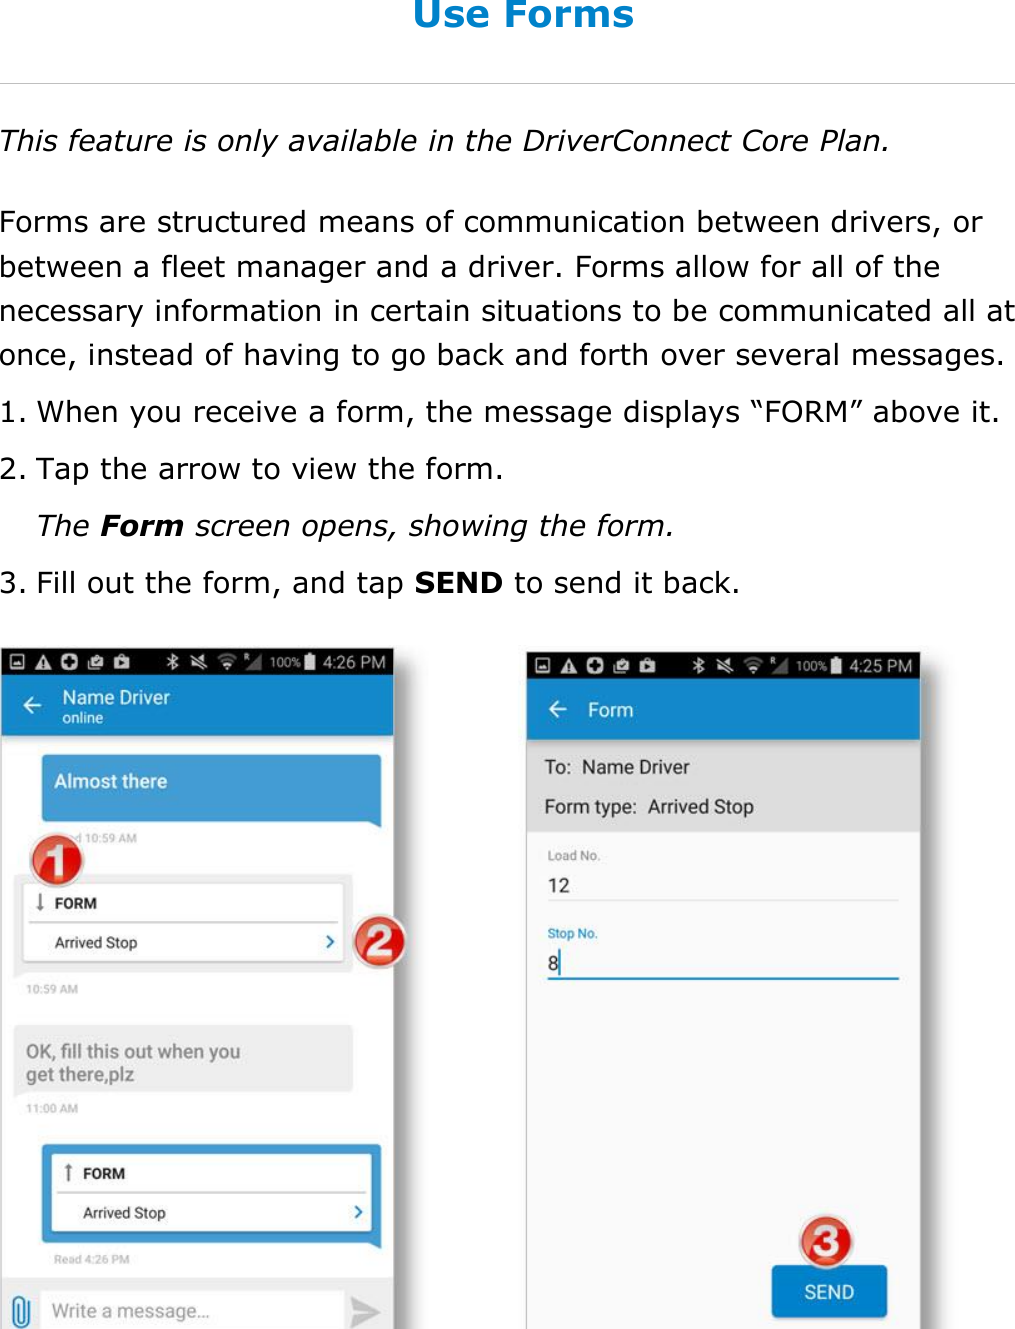 Send Messages, Forms, and Workflows DriverConnect User Guide  75 © 2016-2017, Rand McNally, Inc. Use Forms This feature is only available in the DriverConnect Core Plan. Forms are structured means of communication between drivers, or between a fleet manager and a driver. Forms allow for all of the necessary information in certain situations to be communicated all at once, instead of having to go back and forth over several messages. 1. When you receive a form, the message displays “FORM” above it. 2. Tap the arrow to view the form. The Form screen opens, showing the form. 3. Fill out the form, and tap SEND to send it back.    